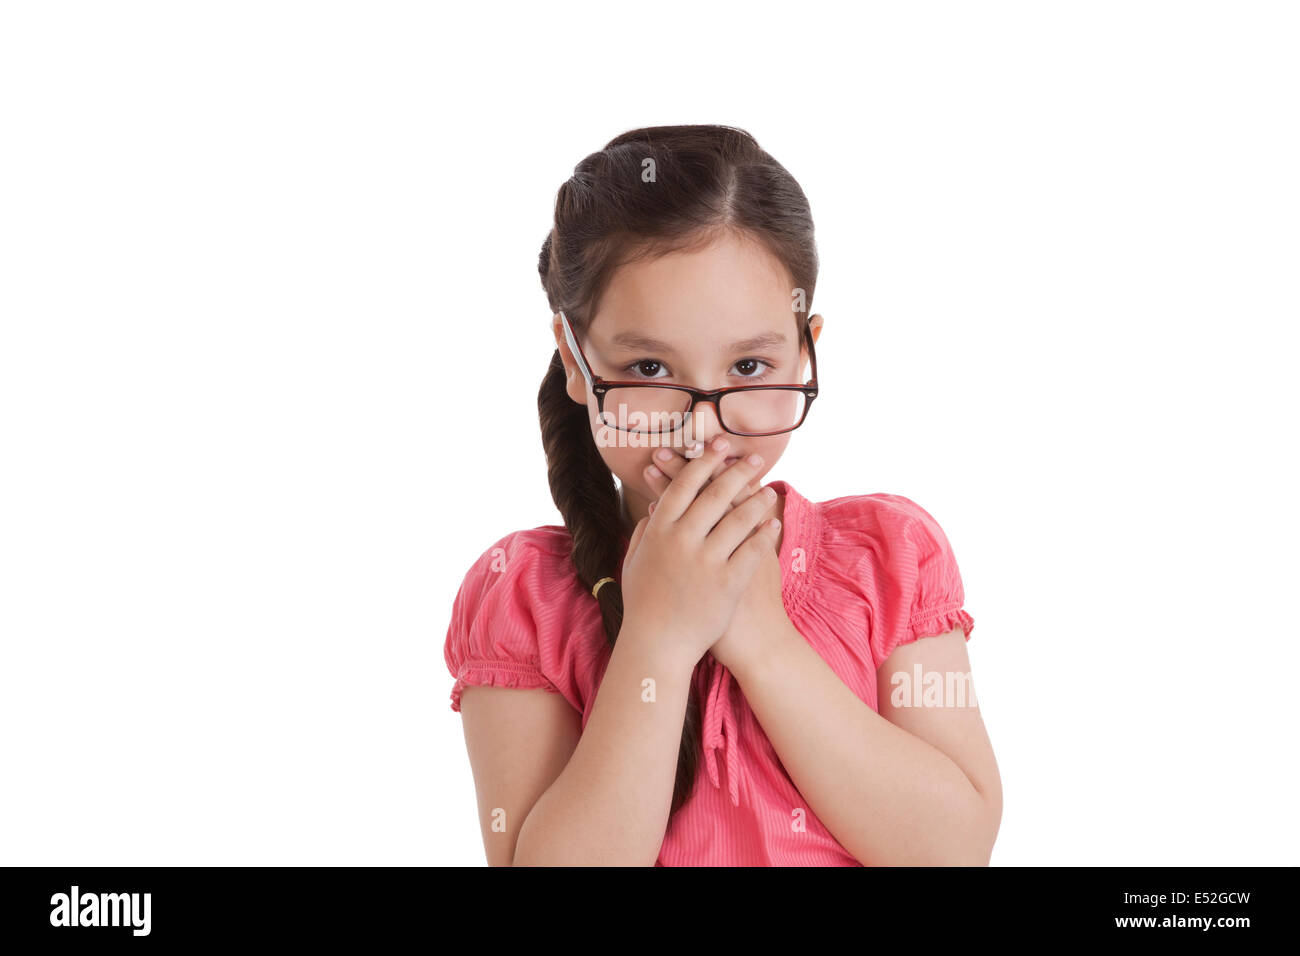 Portrait of little girl covering mouth with hands Stock Photo